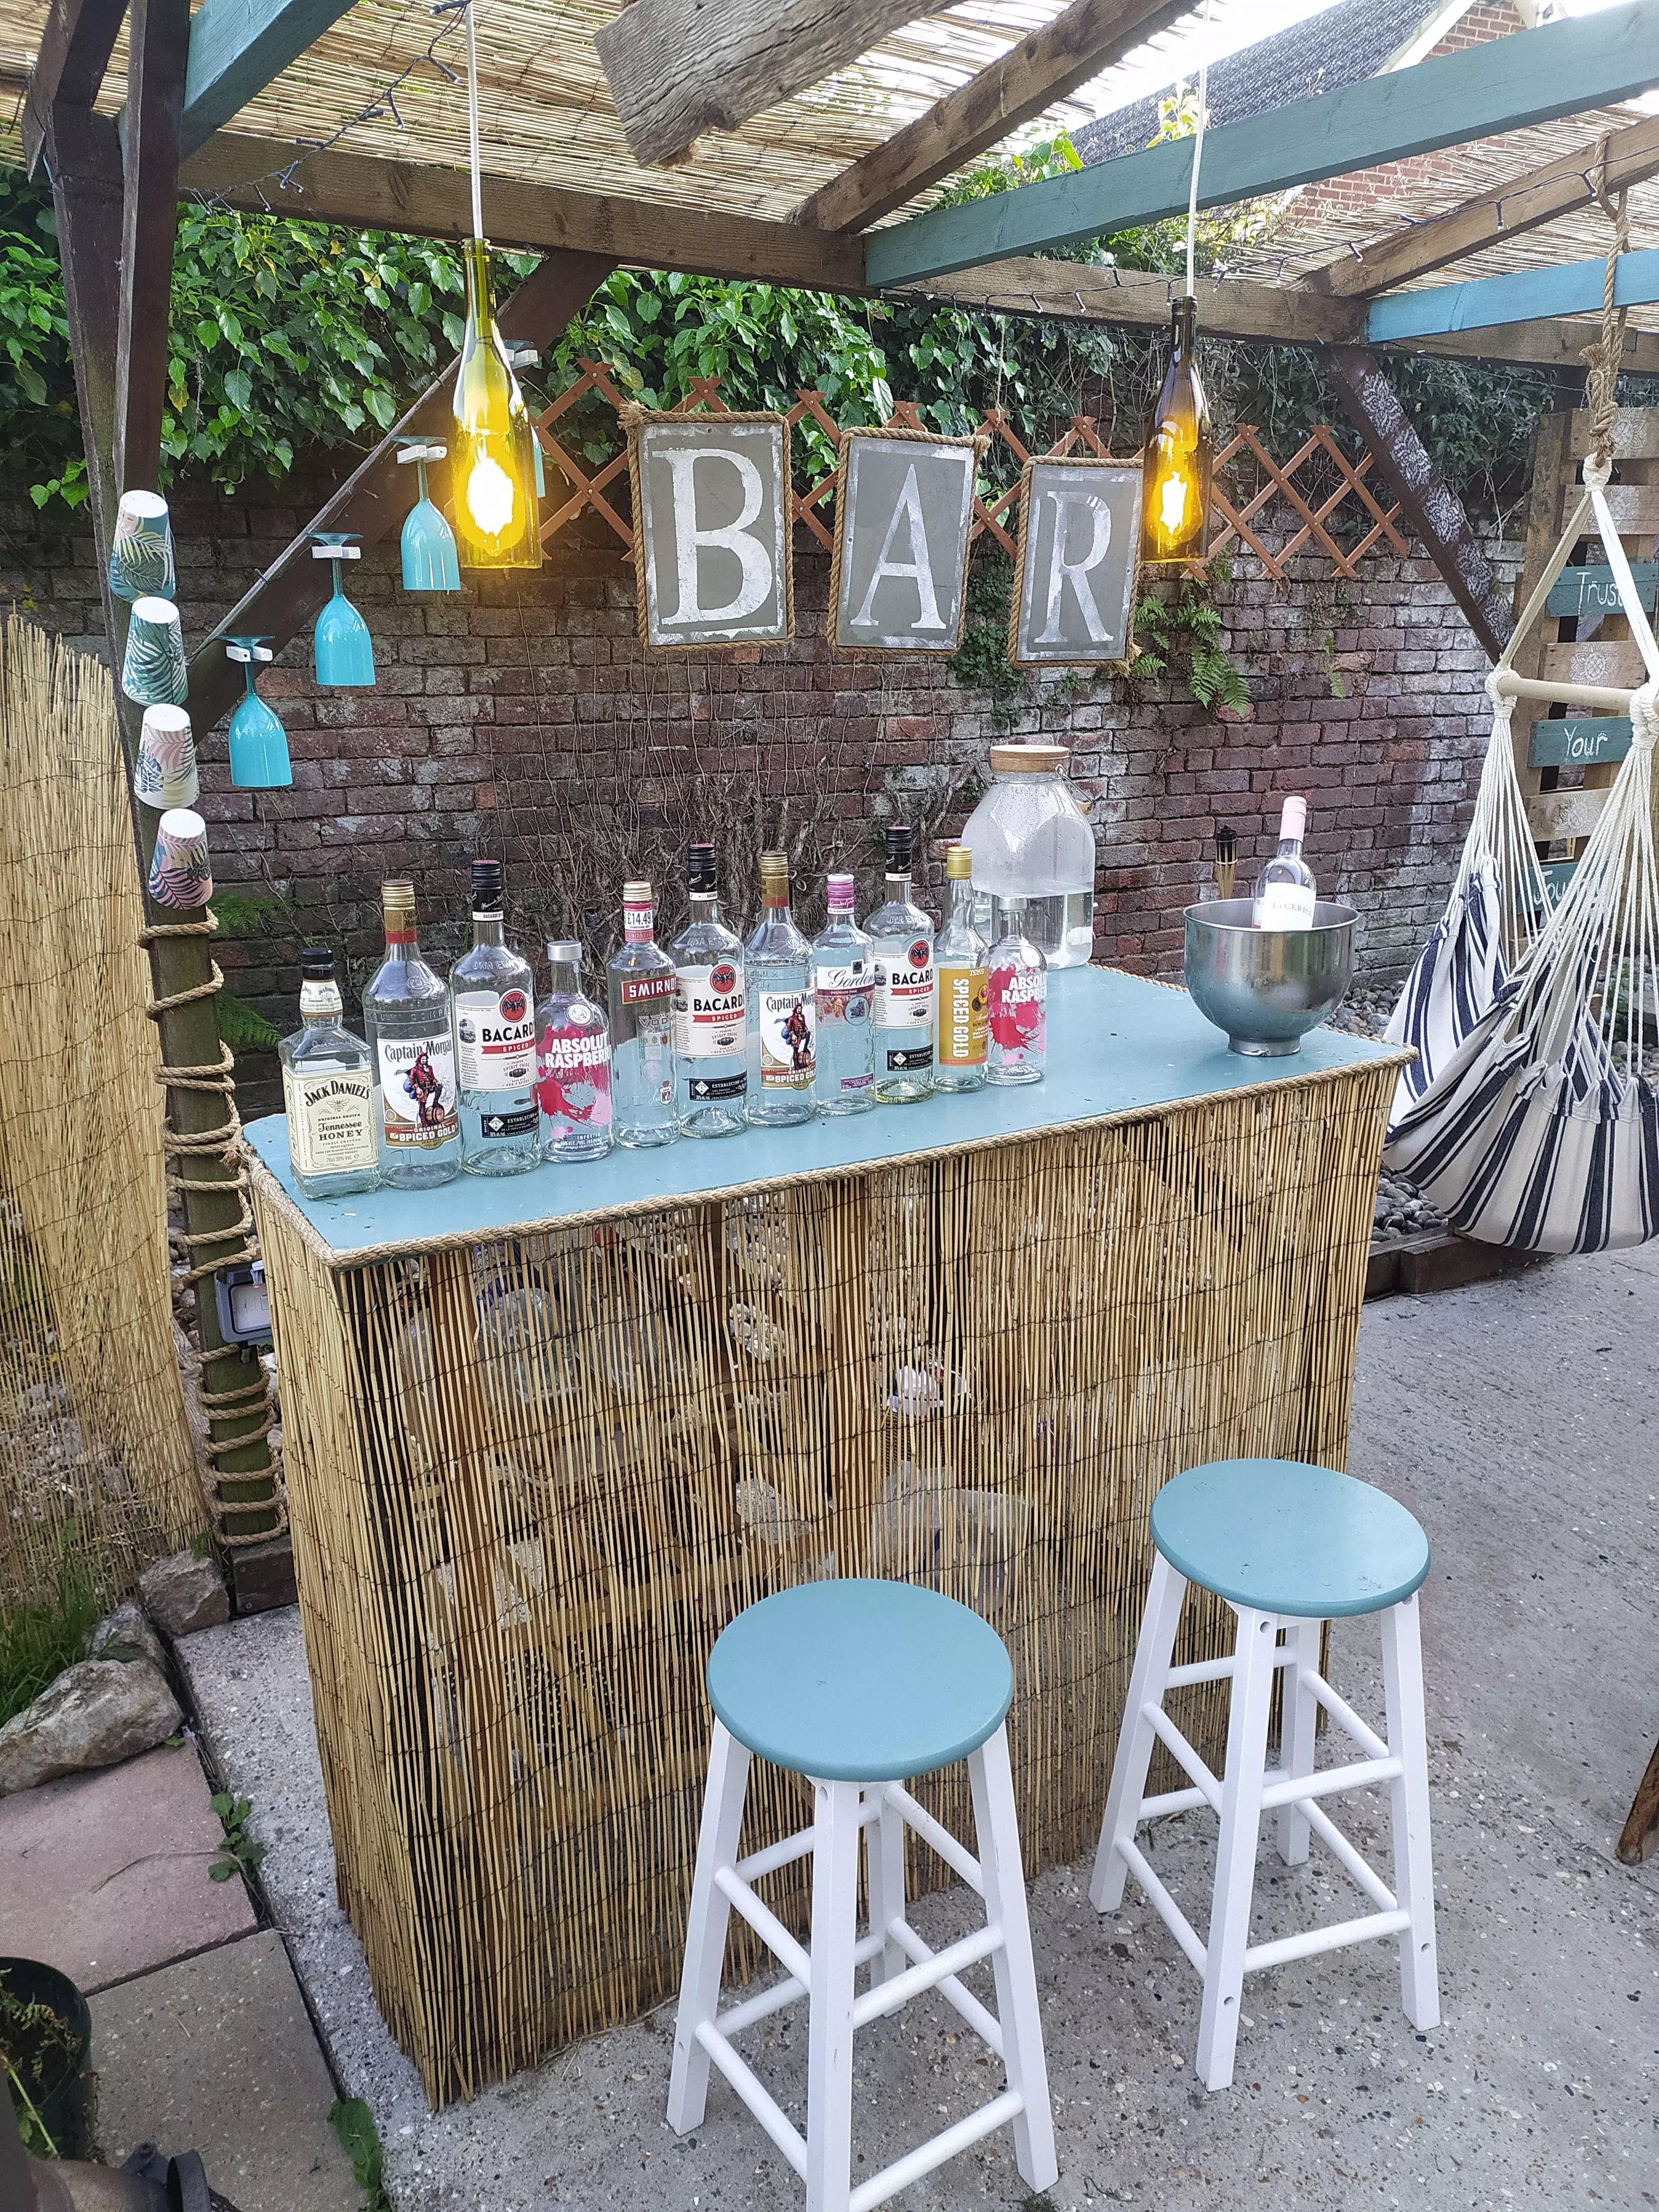 The bar is installed, complete with bamboo fencing and plenty of drinks options! (